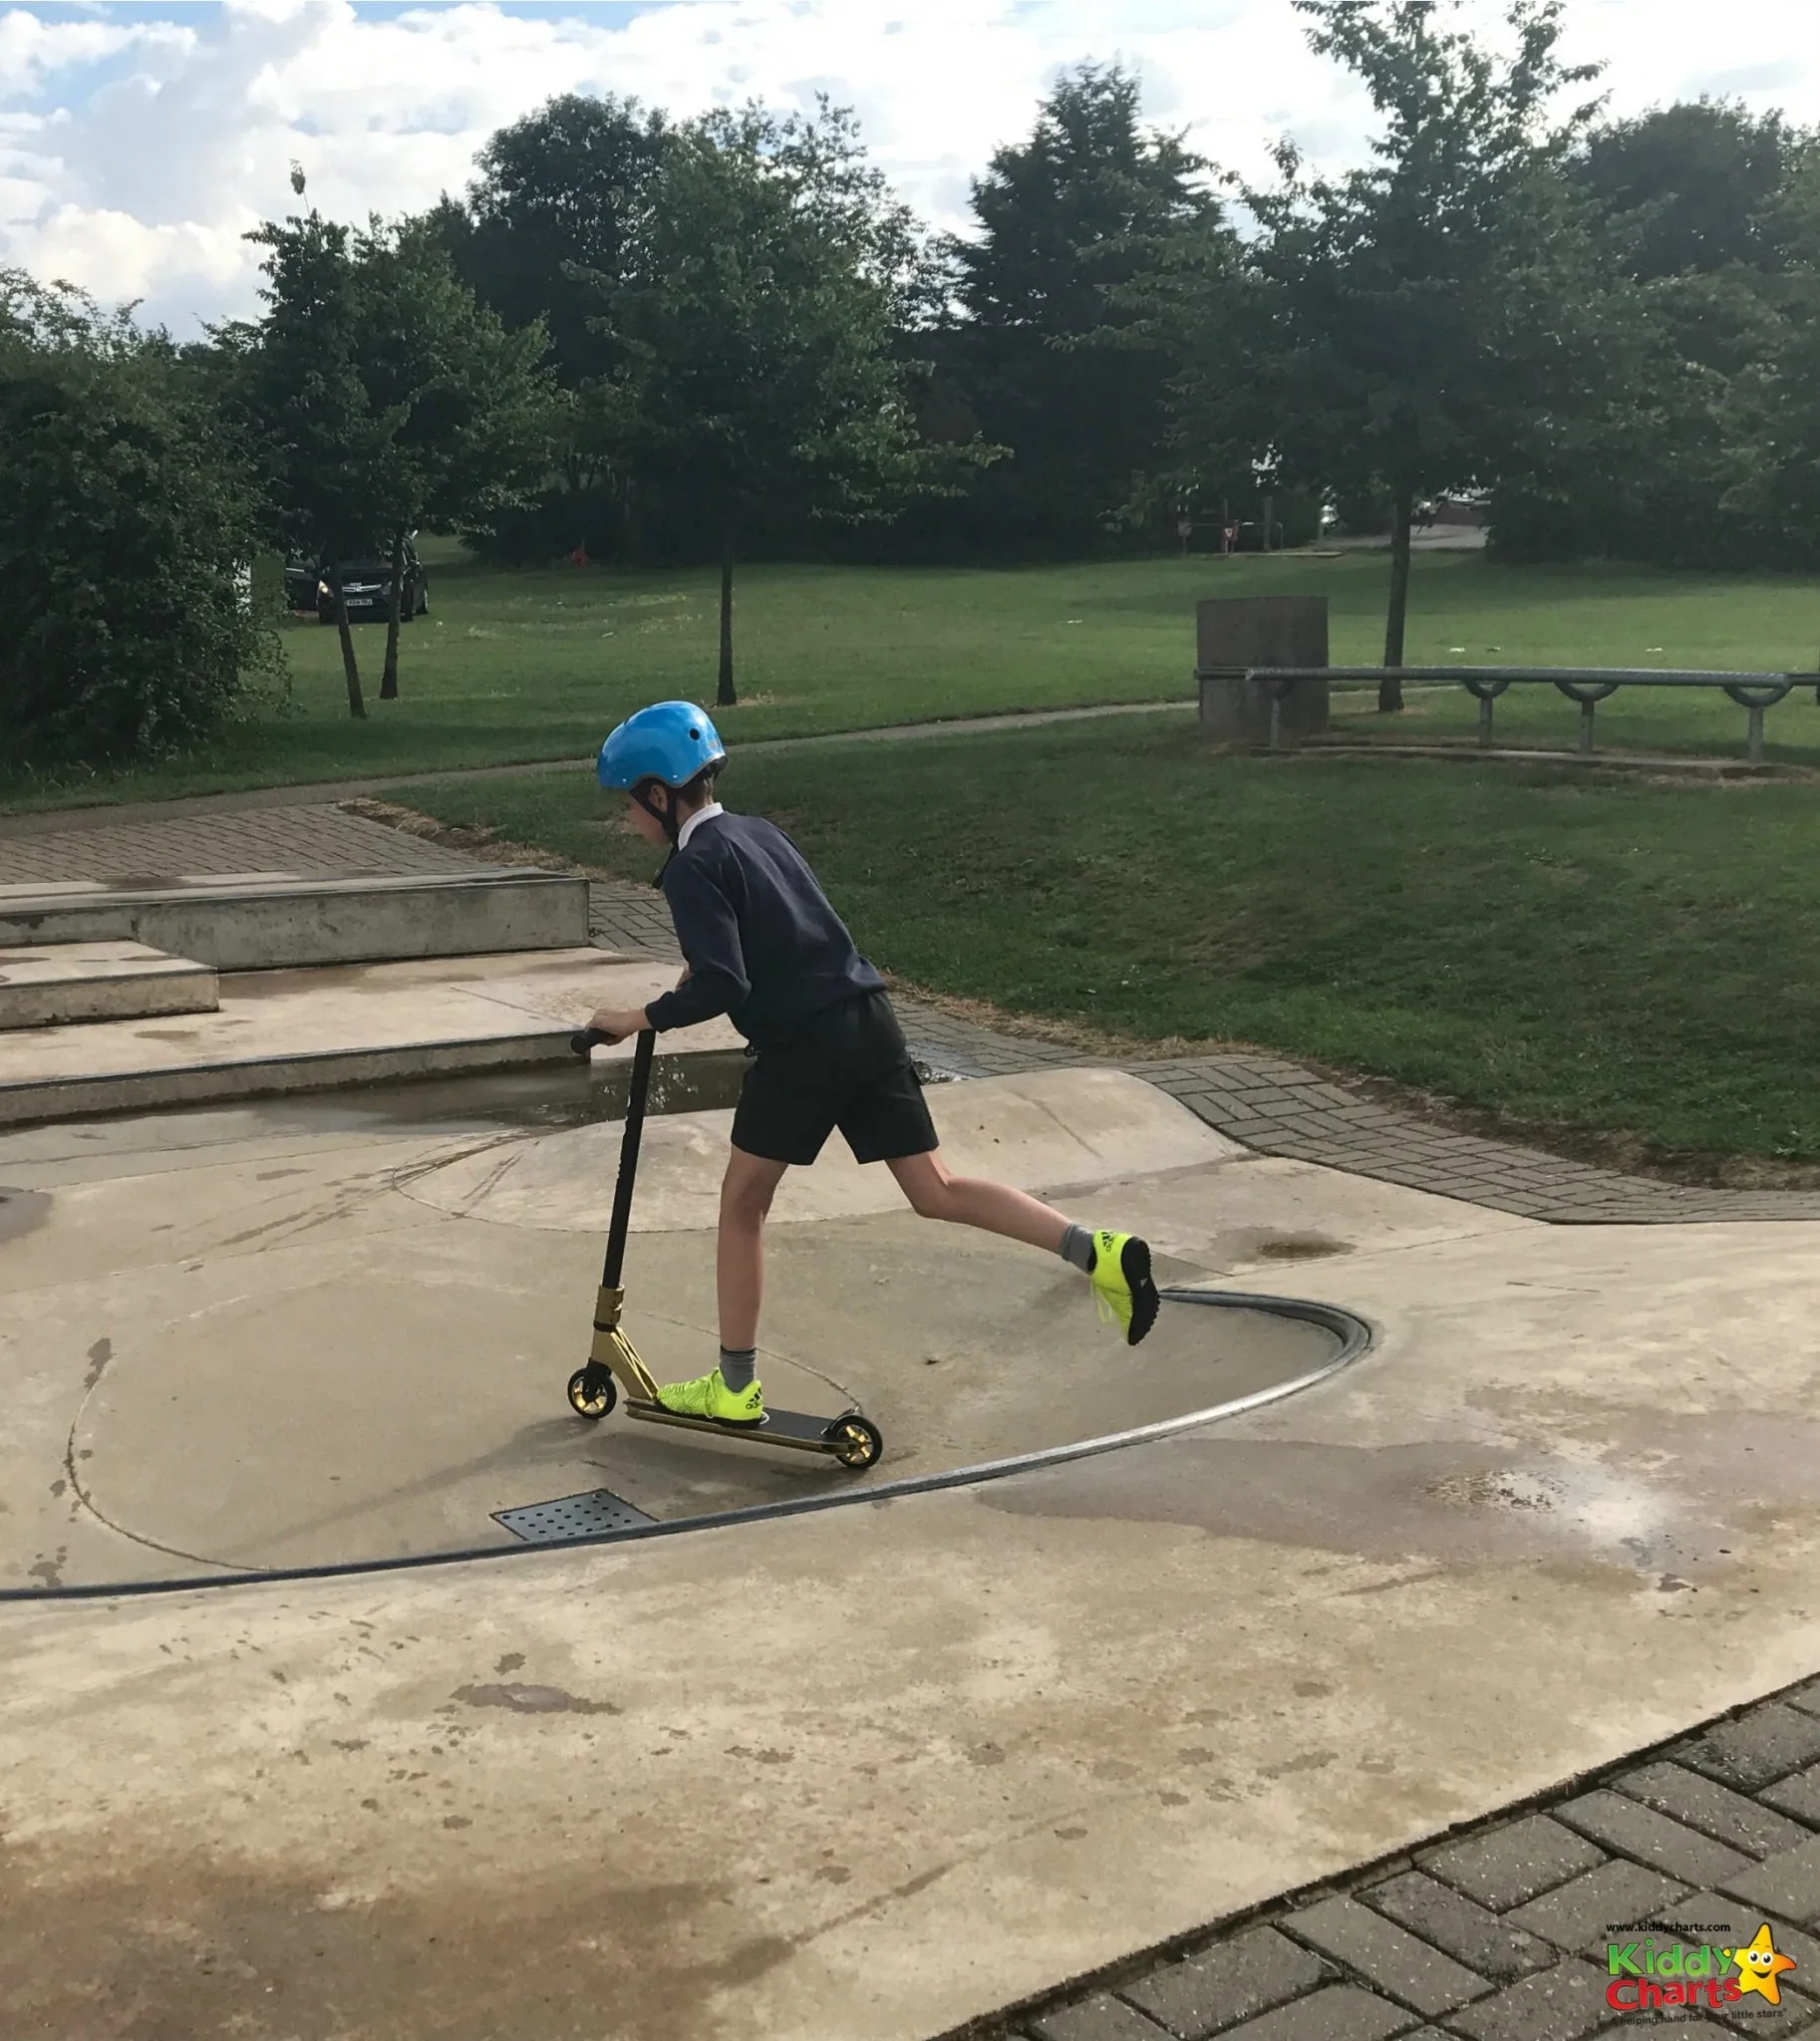 The Microscooter Cross Neck is definitely a good stunt scooter, and could be the best stunt scooter, designed for 12+, but my ten your old seems to be rather enjoying it - why not take a look?